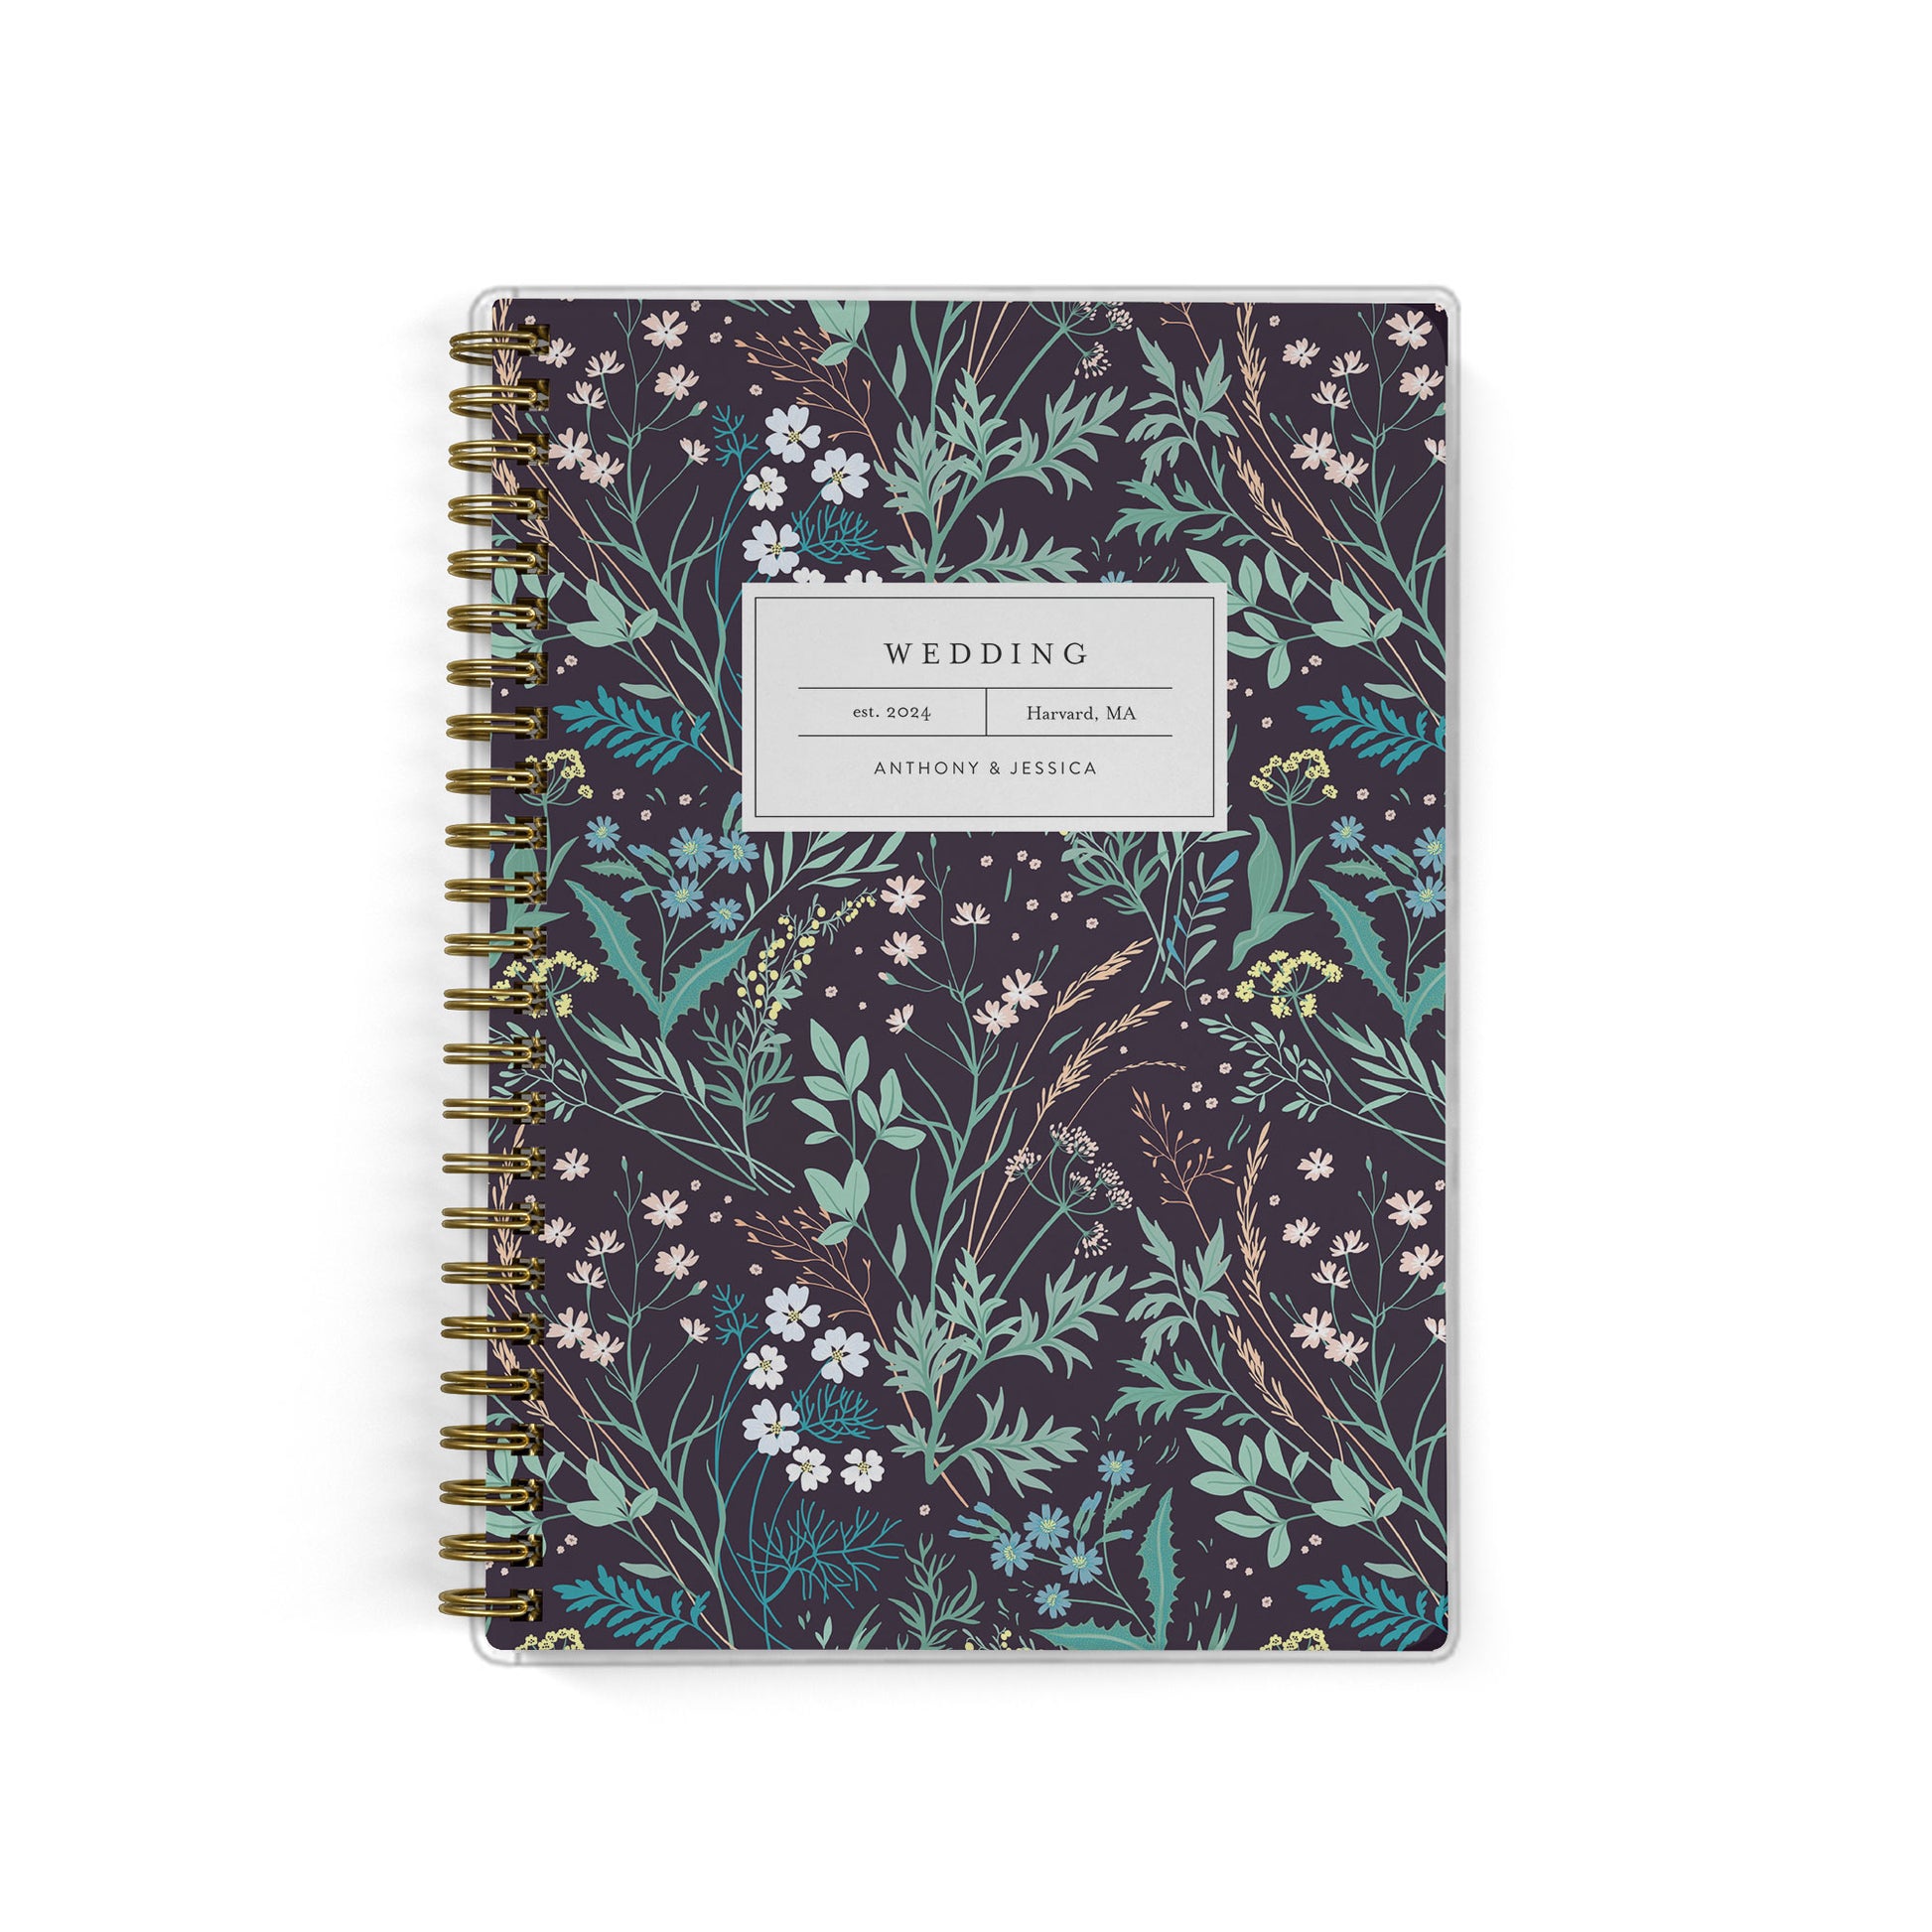 Our exclusive mini wedding planners are perfect for planning small weddings and elopements, shown in a black wildflower pattern